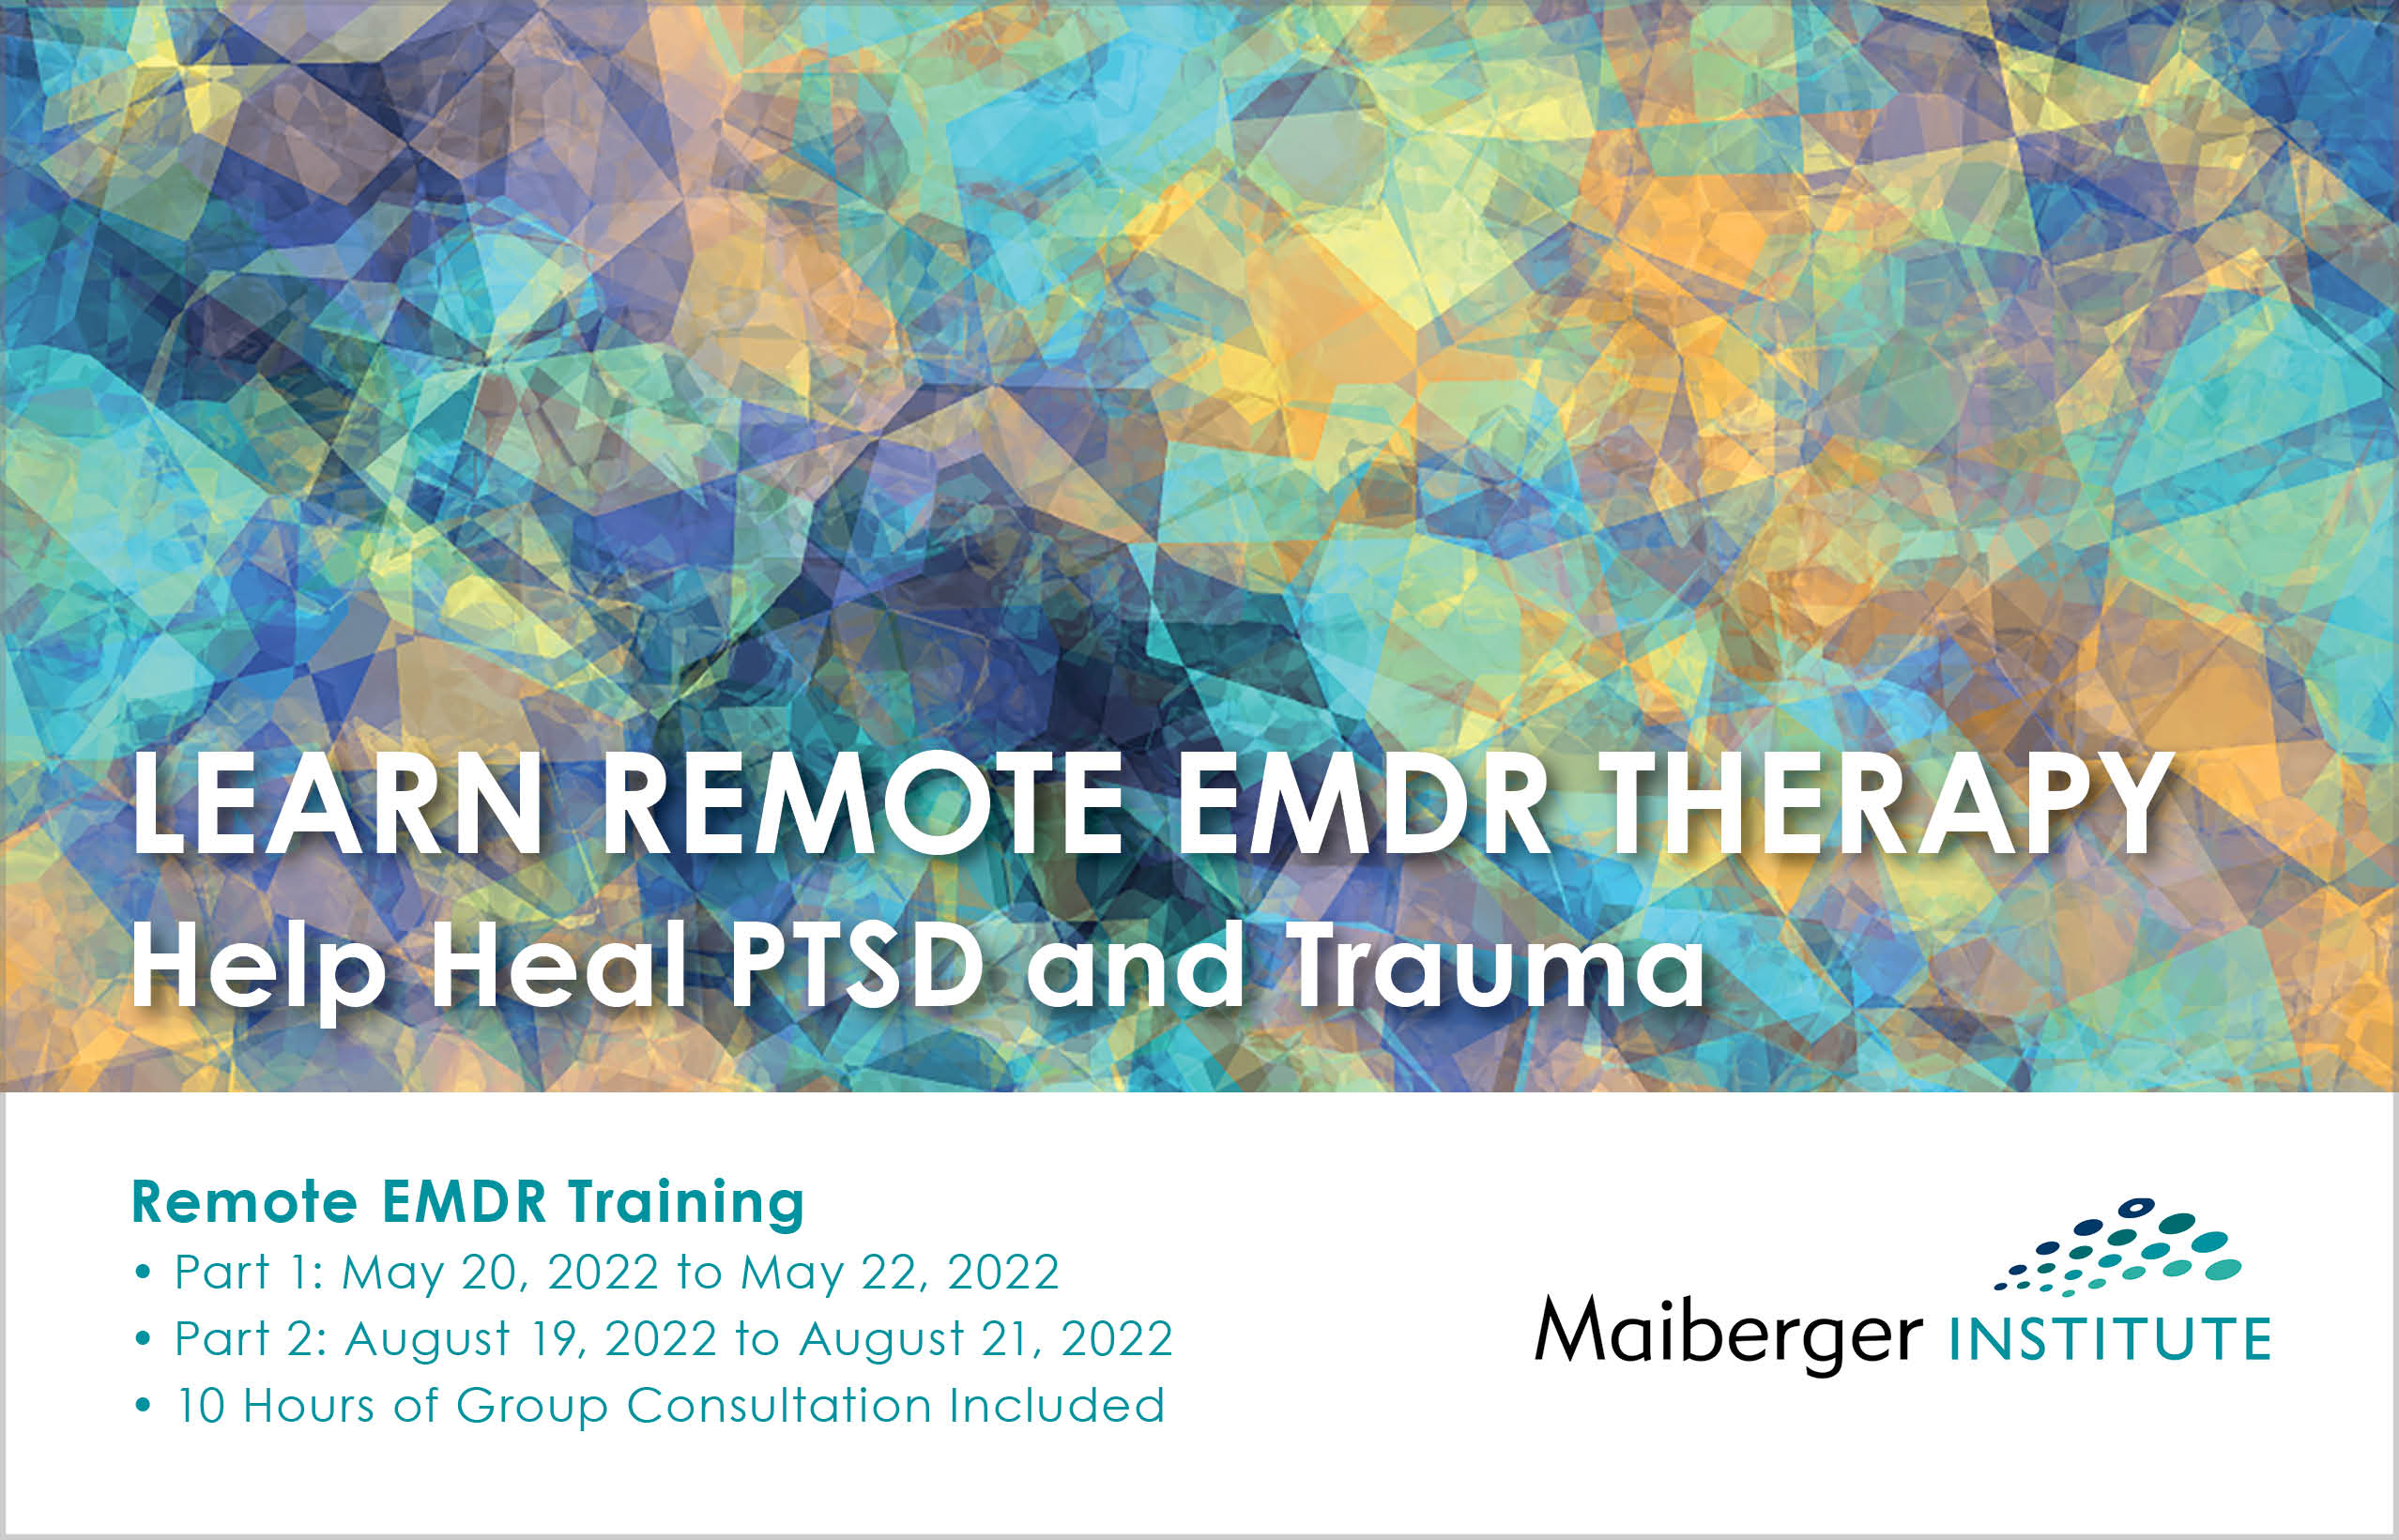 Remote EMDR Training - Part 1: May 20, 2022 to May 22, 2022 - Part 2: August 19, 2022 to August 21, 2022 - 10 Hours of Group Consultation Included